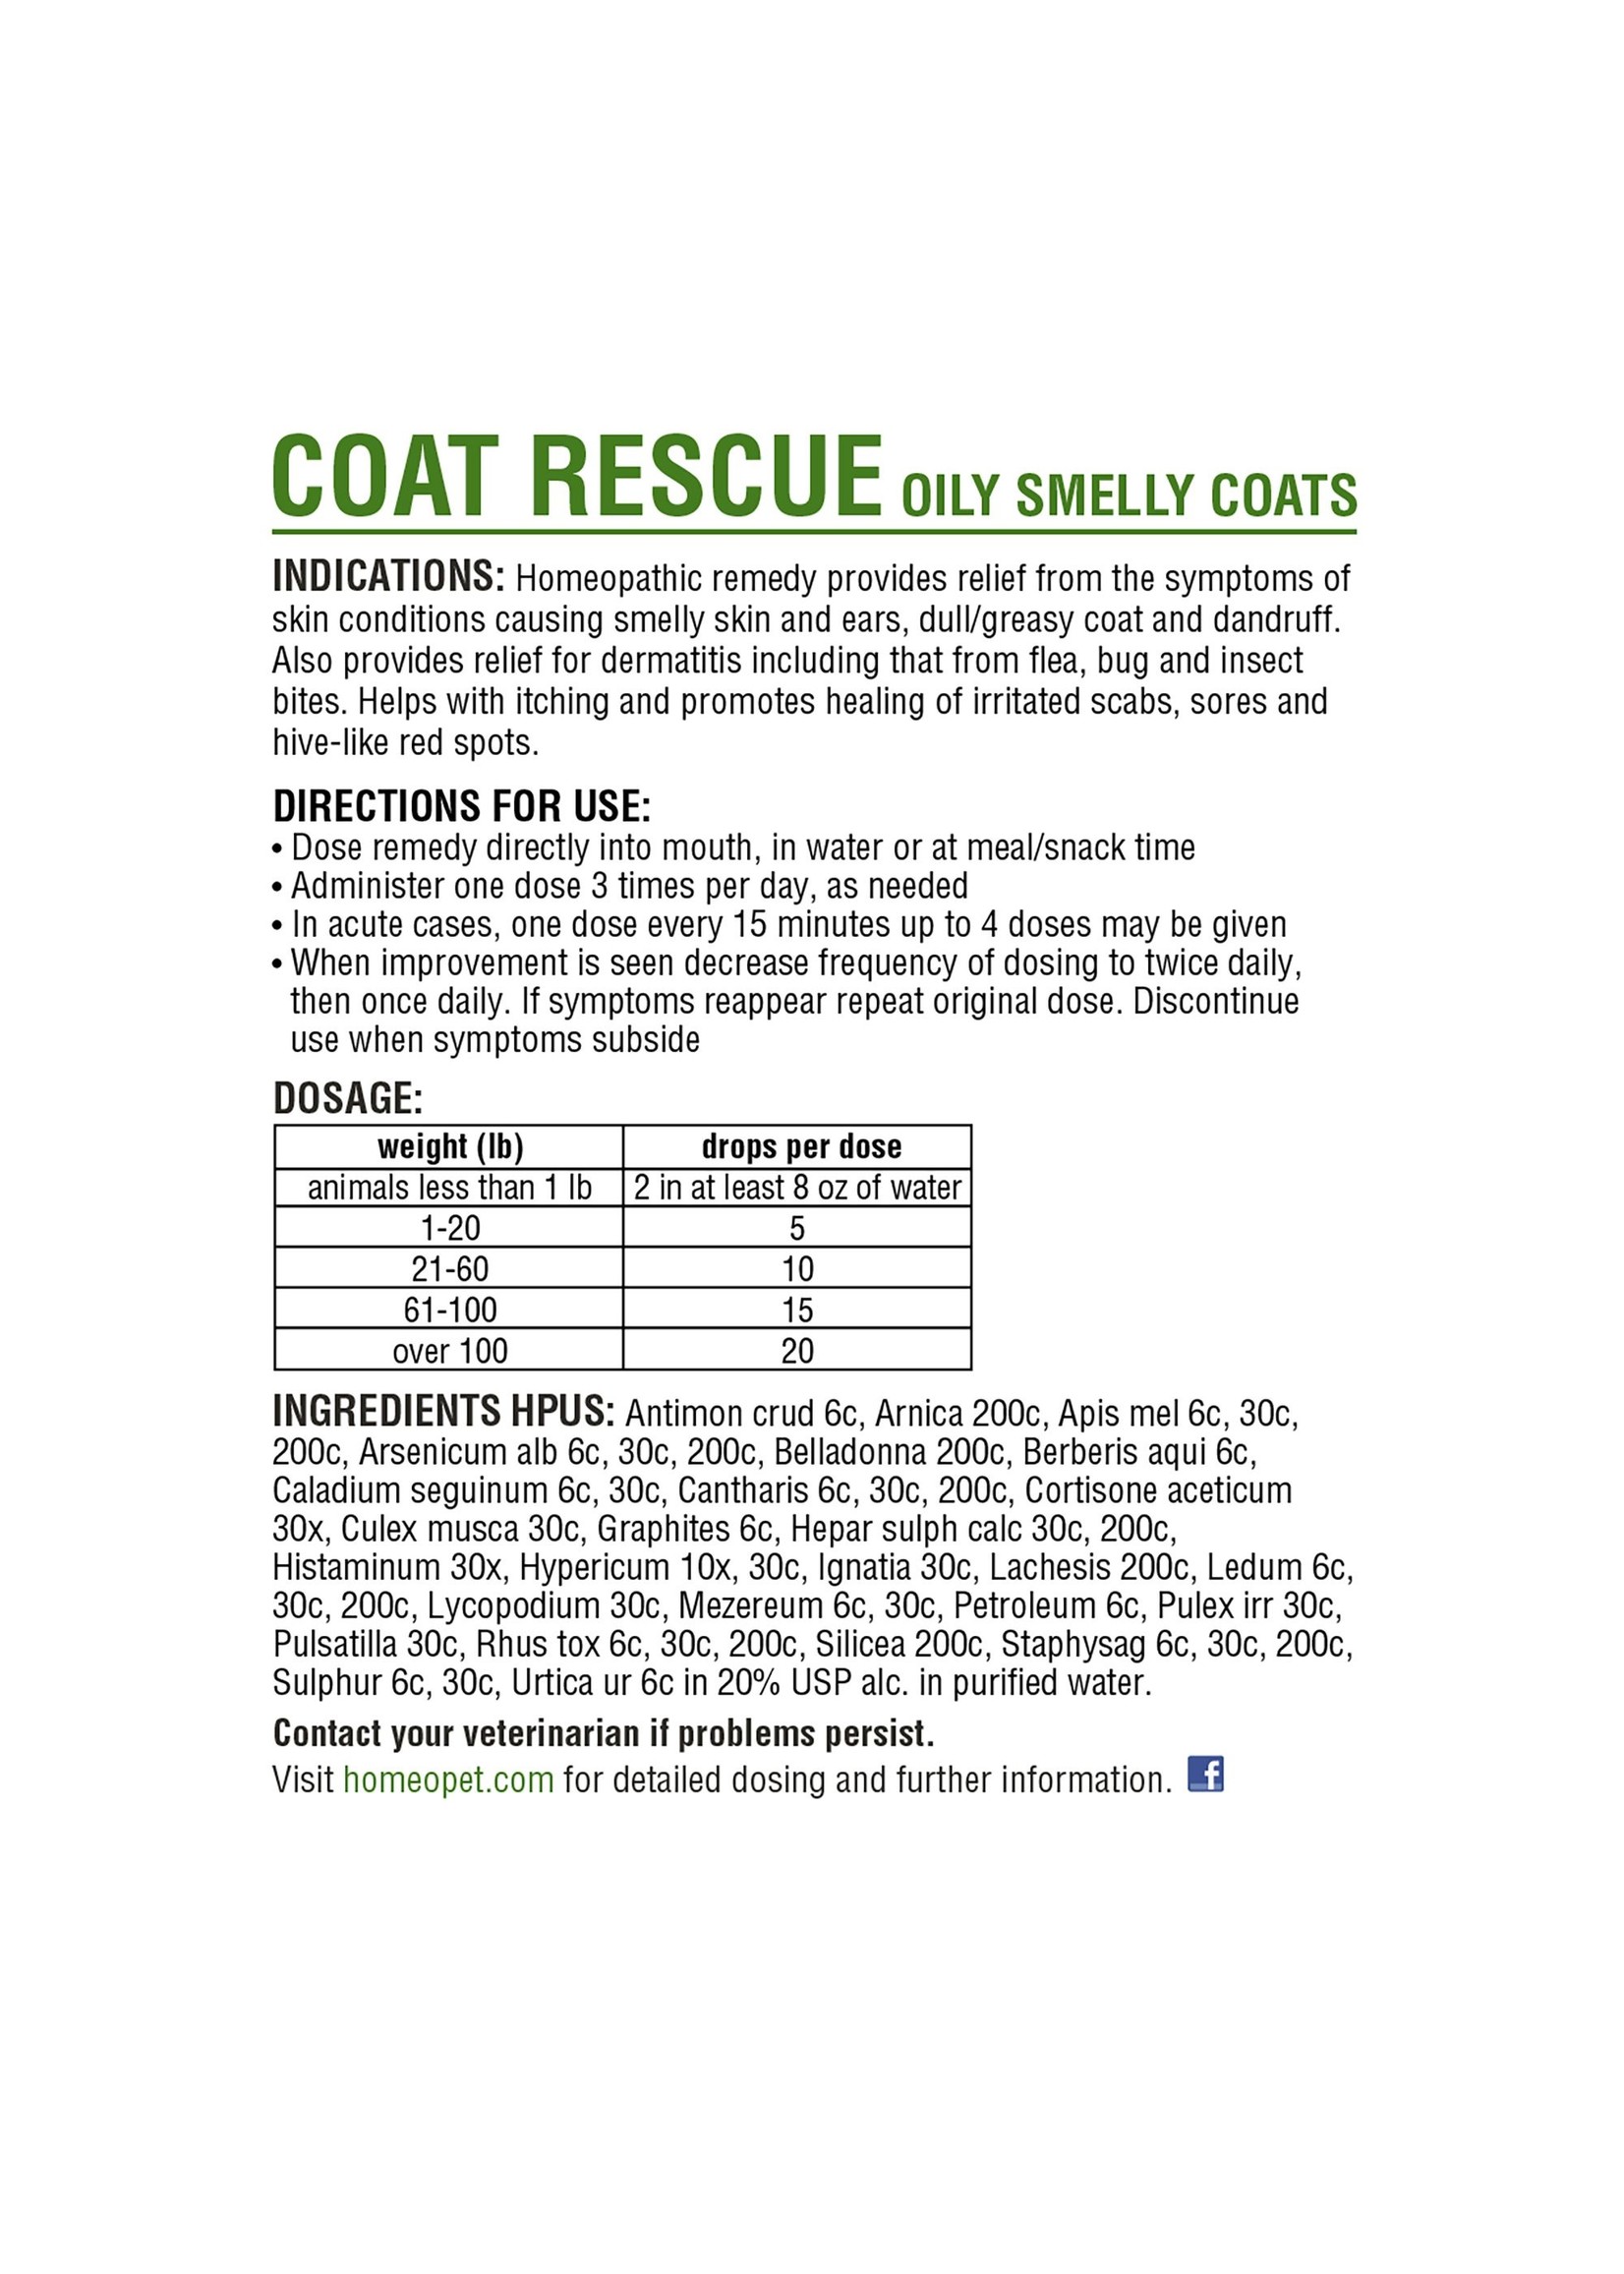 HomeoPet HomeoPet Coat Rescue